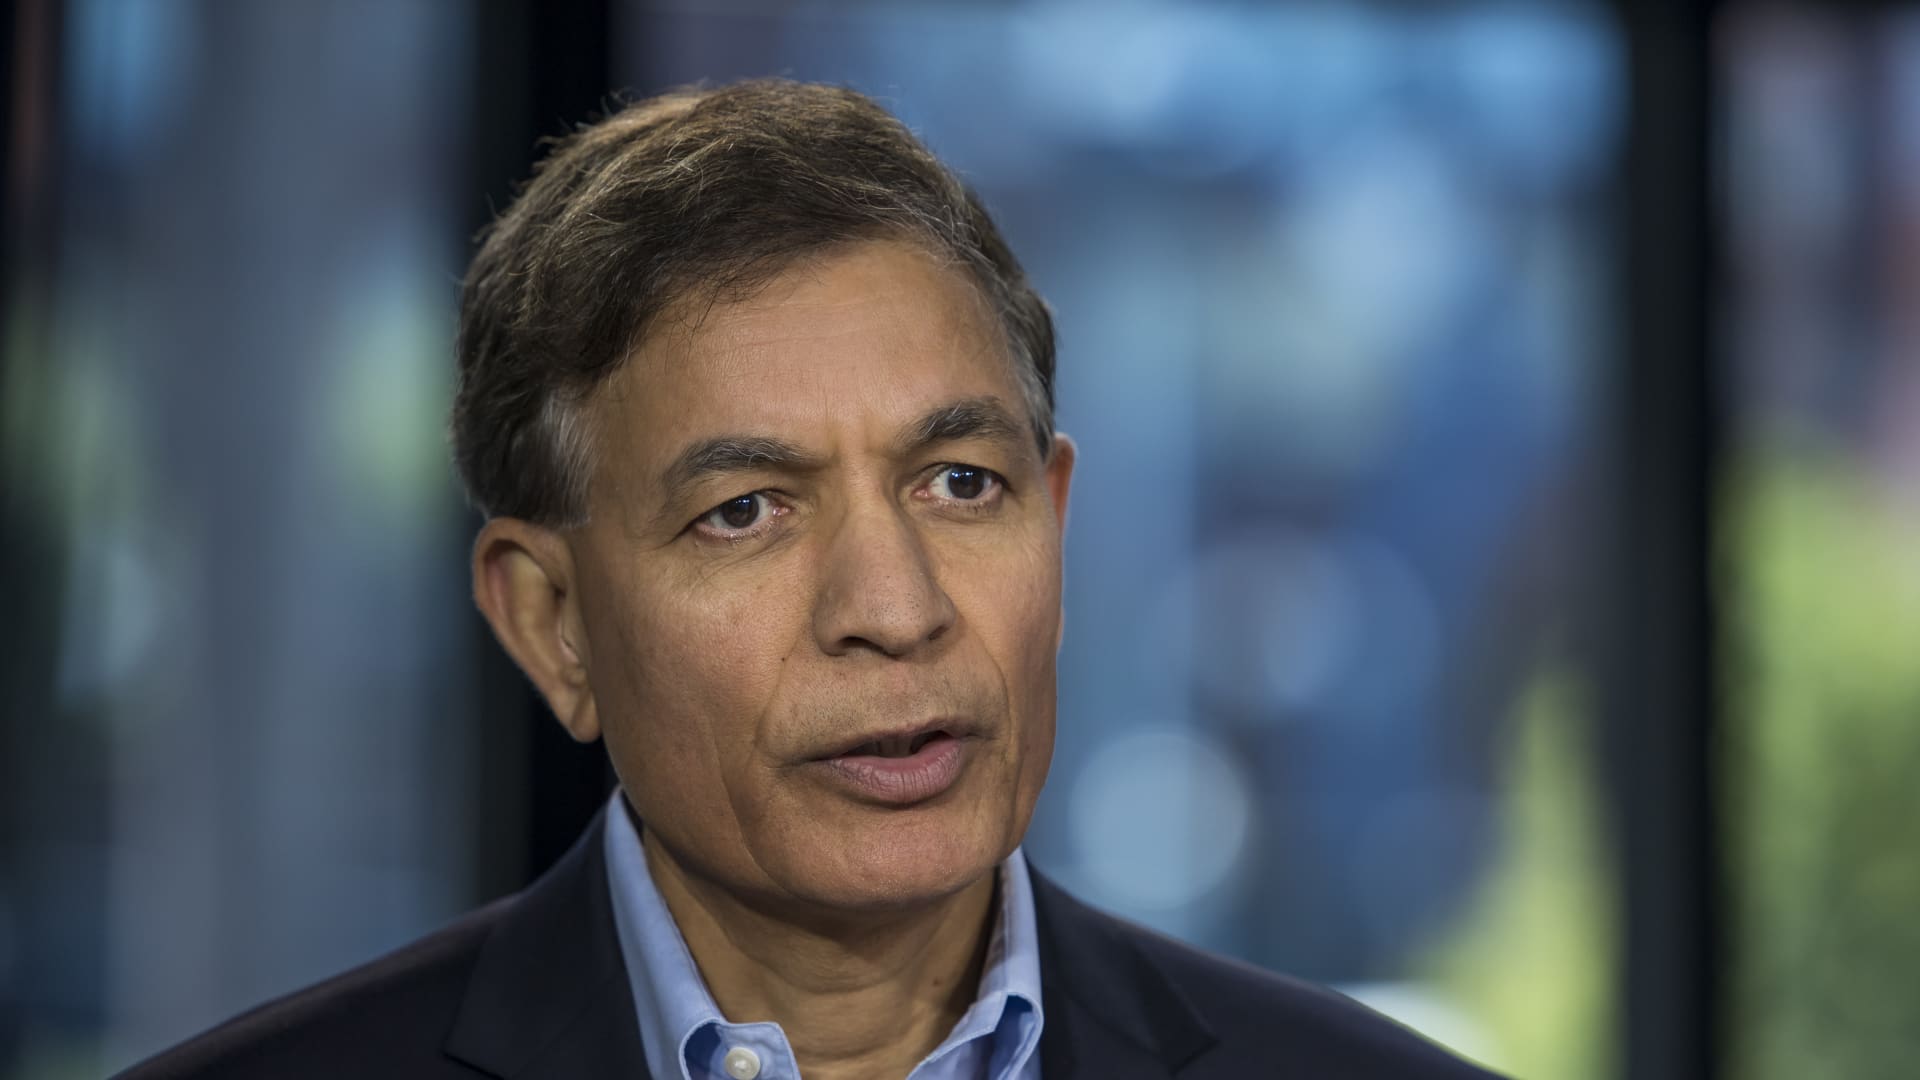 Jay Chaudry, founder and chief executive officer of Zscaler Inc.